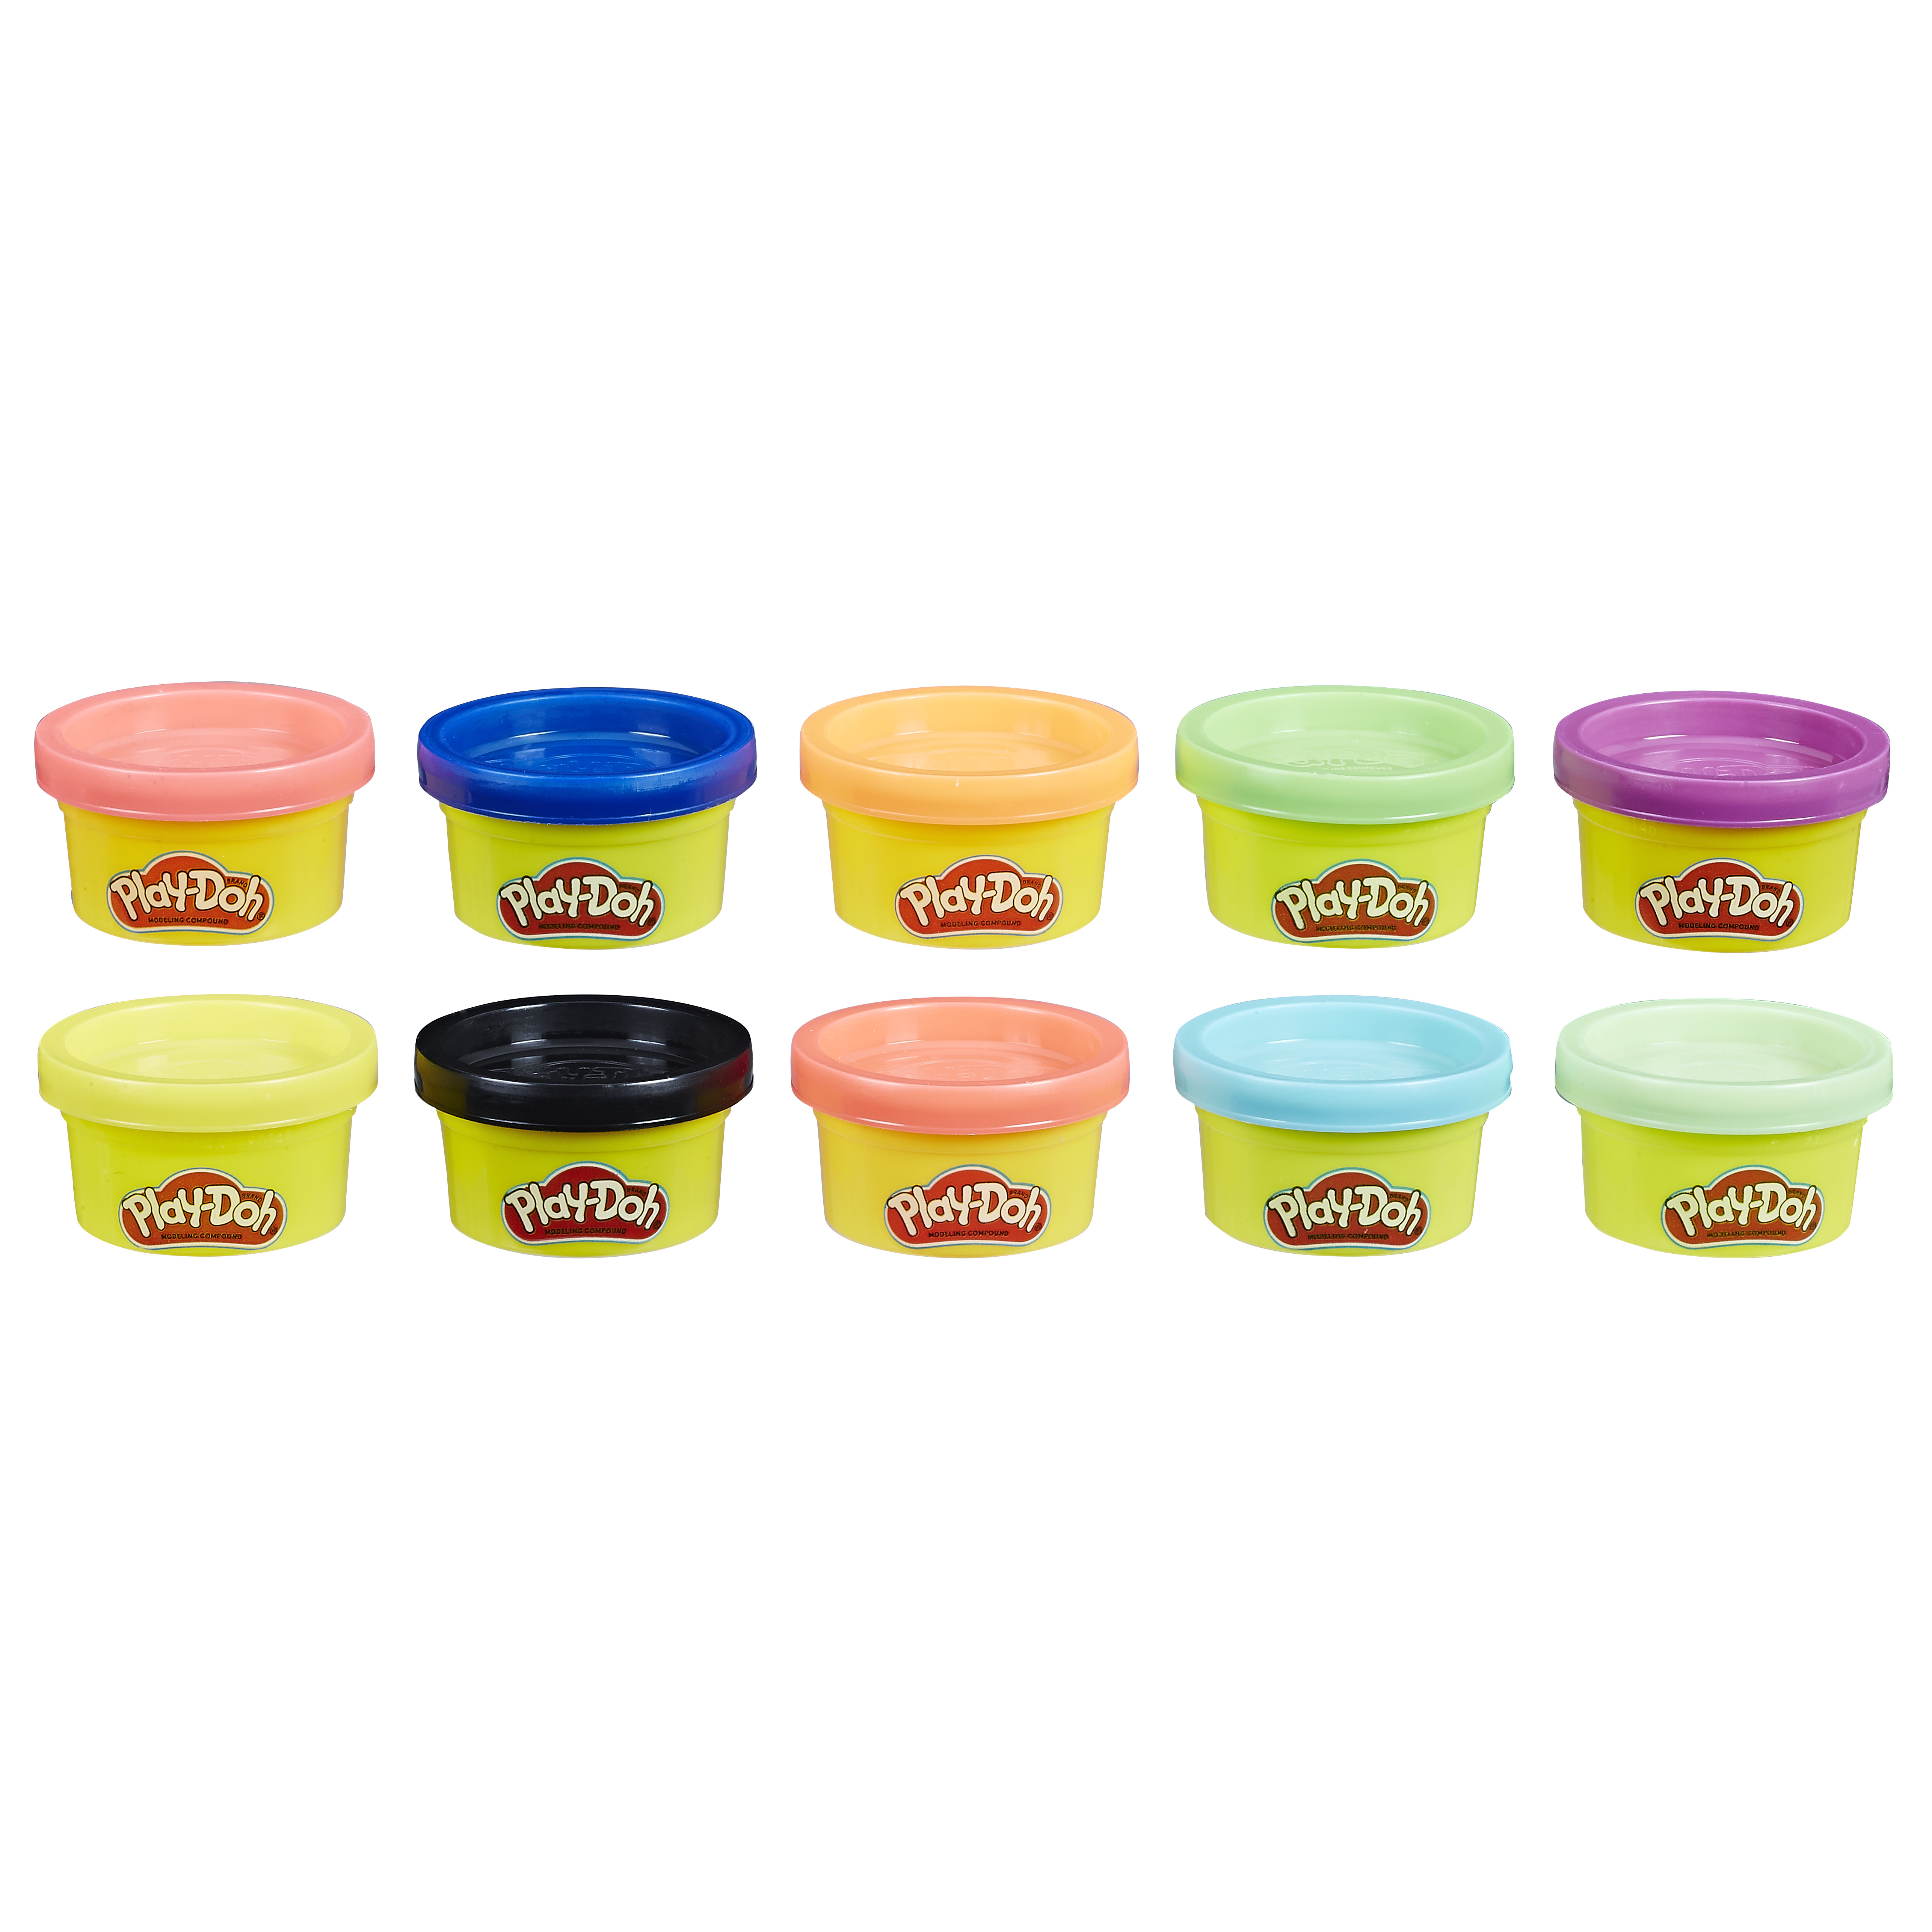 PLAY-DOH Play-Doh Mehrfarbig Turm Spielset, Party